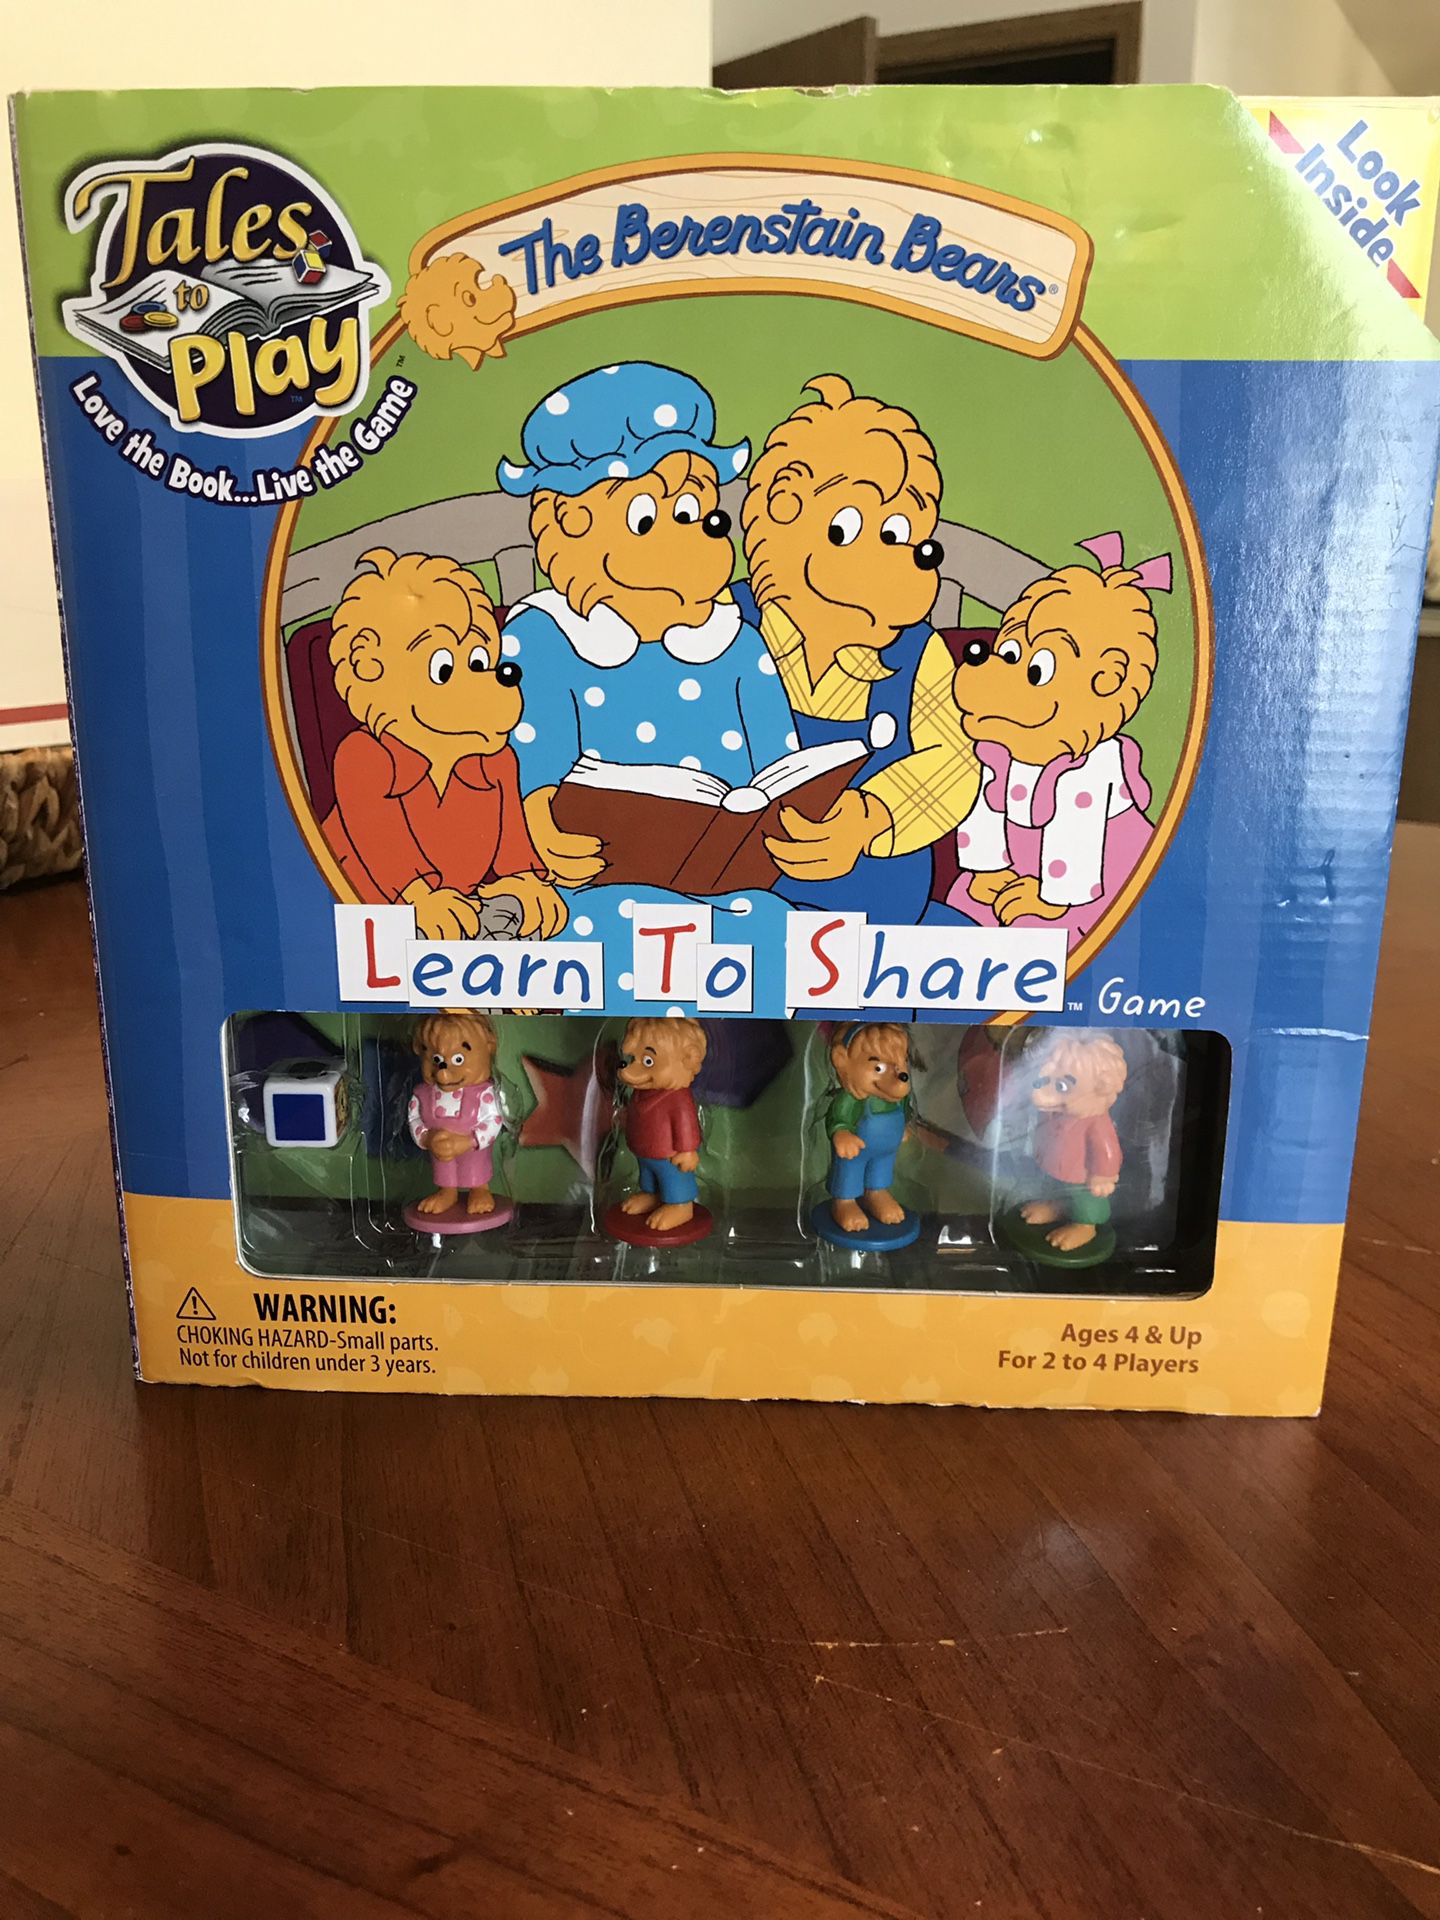 The Berenstain Bears "Learn to Share Game"